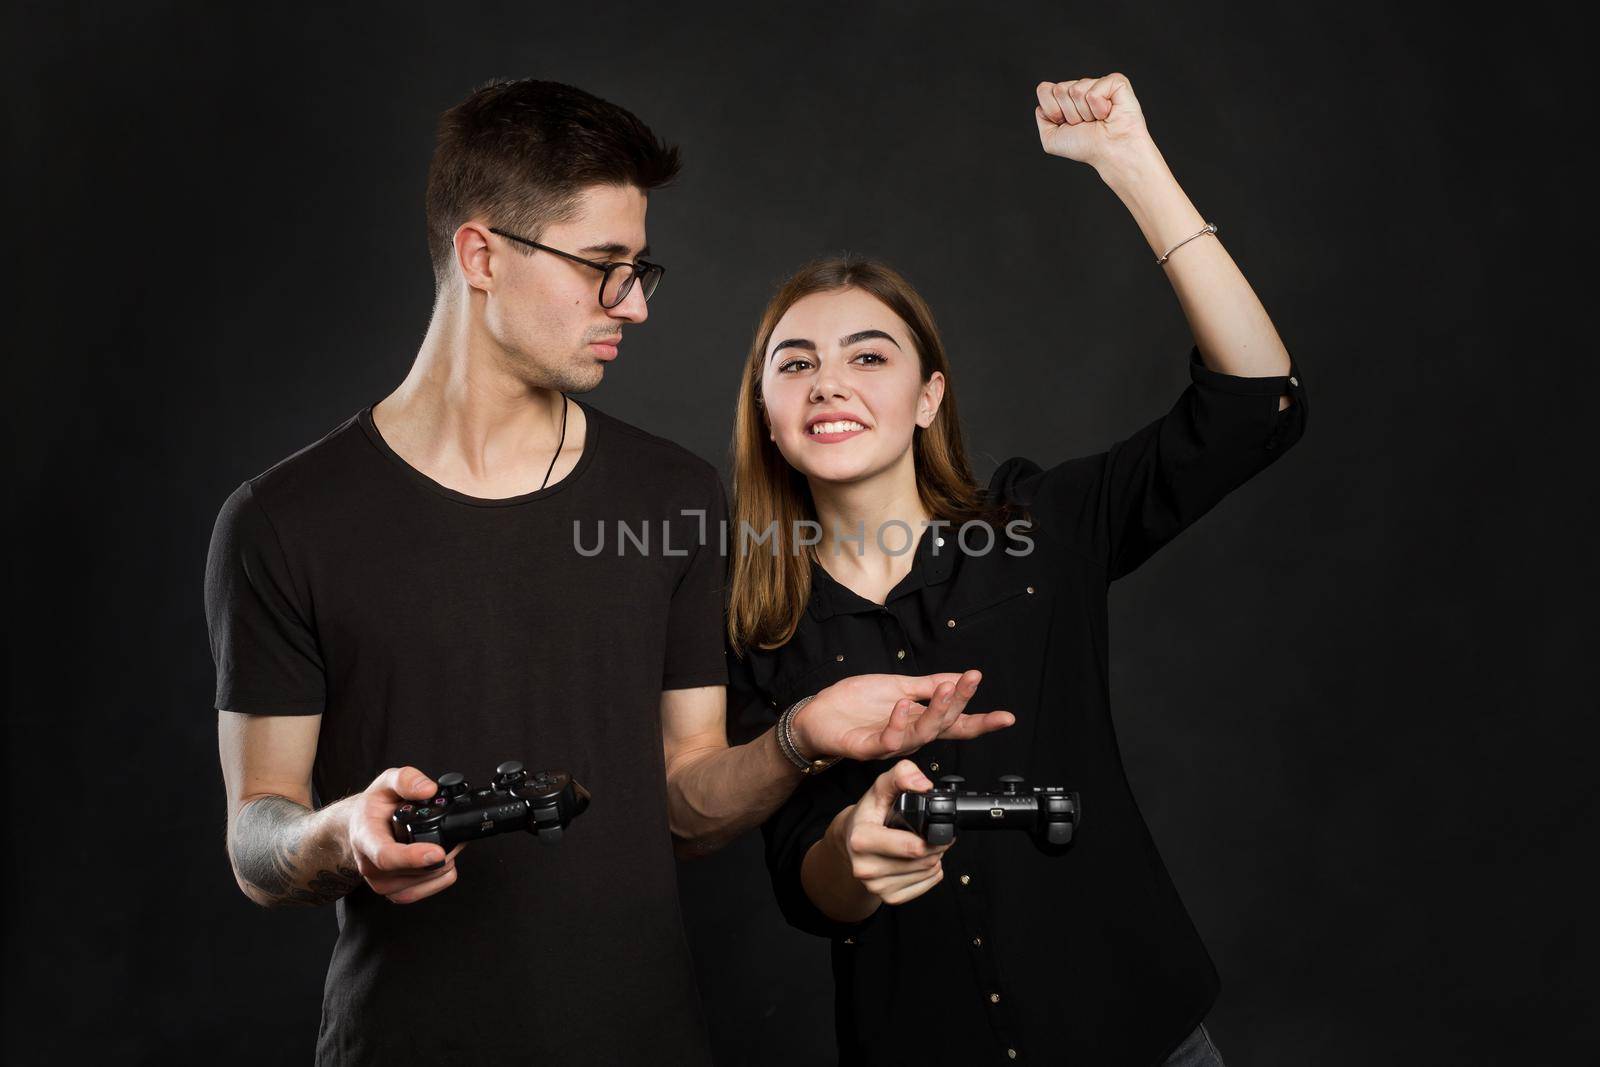 Beautiful young couple playing video games with joysticks together, isolated on black background.